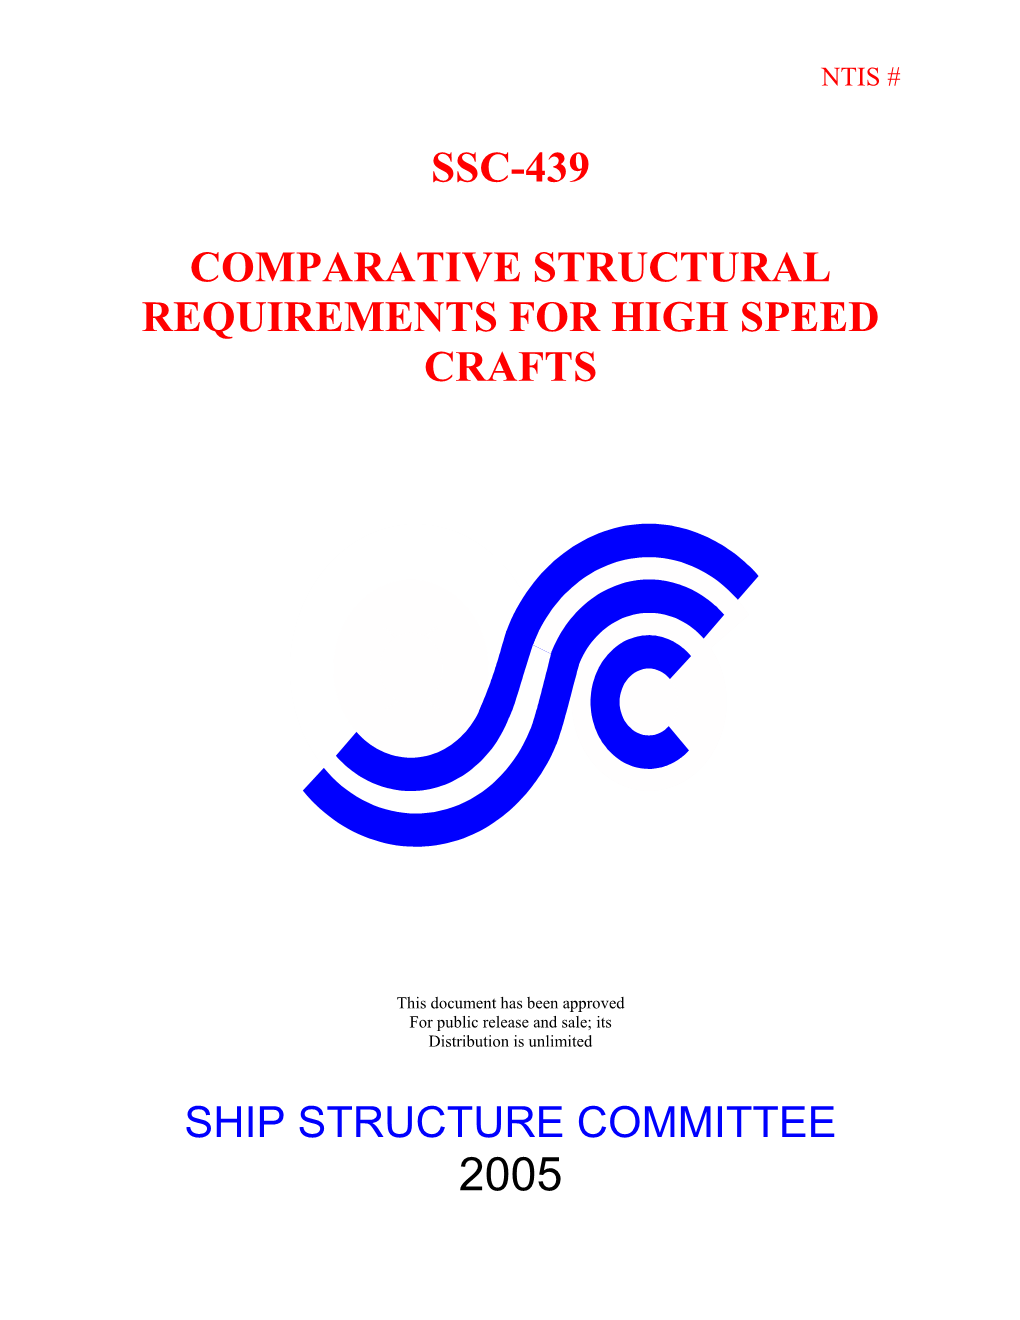 Ssc-439 Comparative Structural Requirements